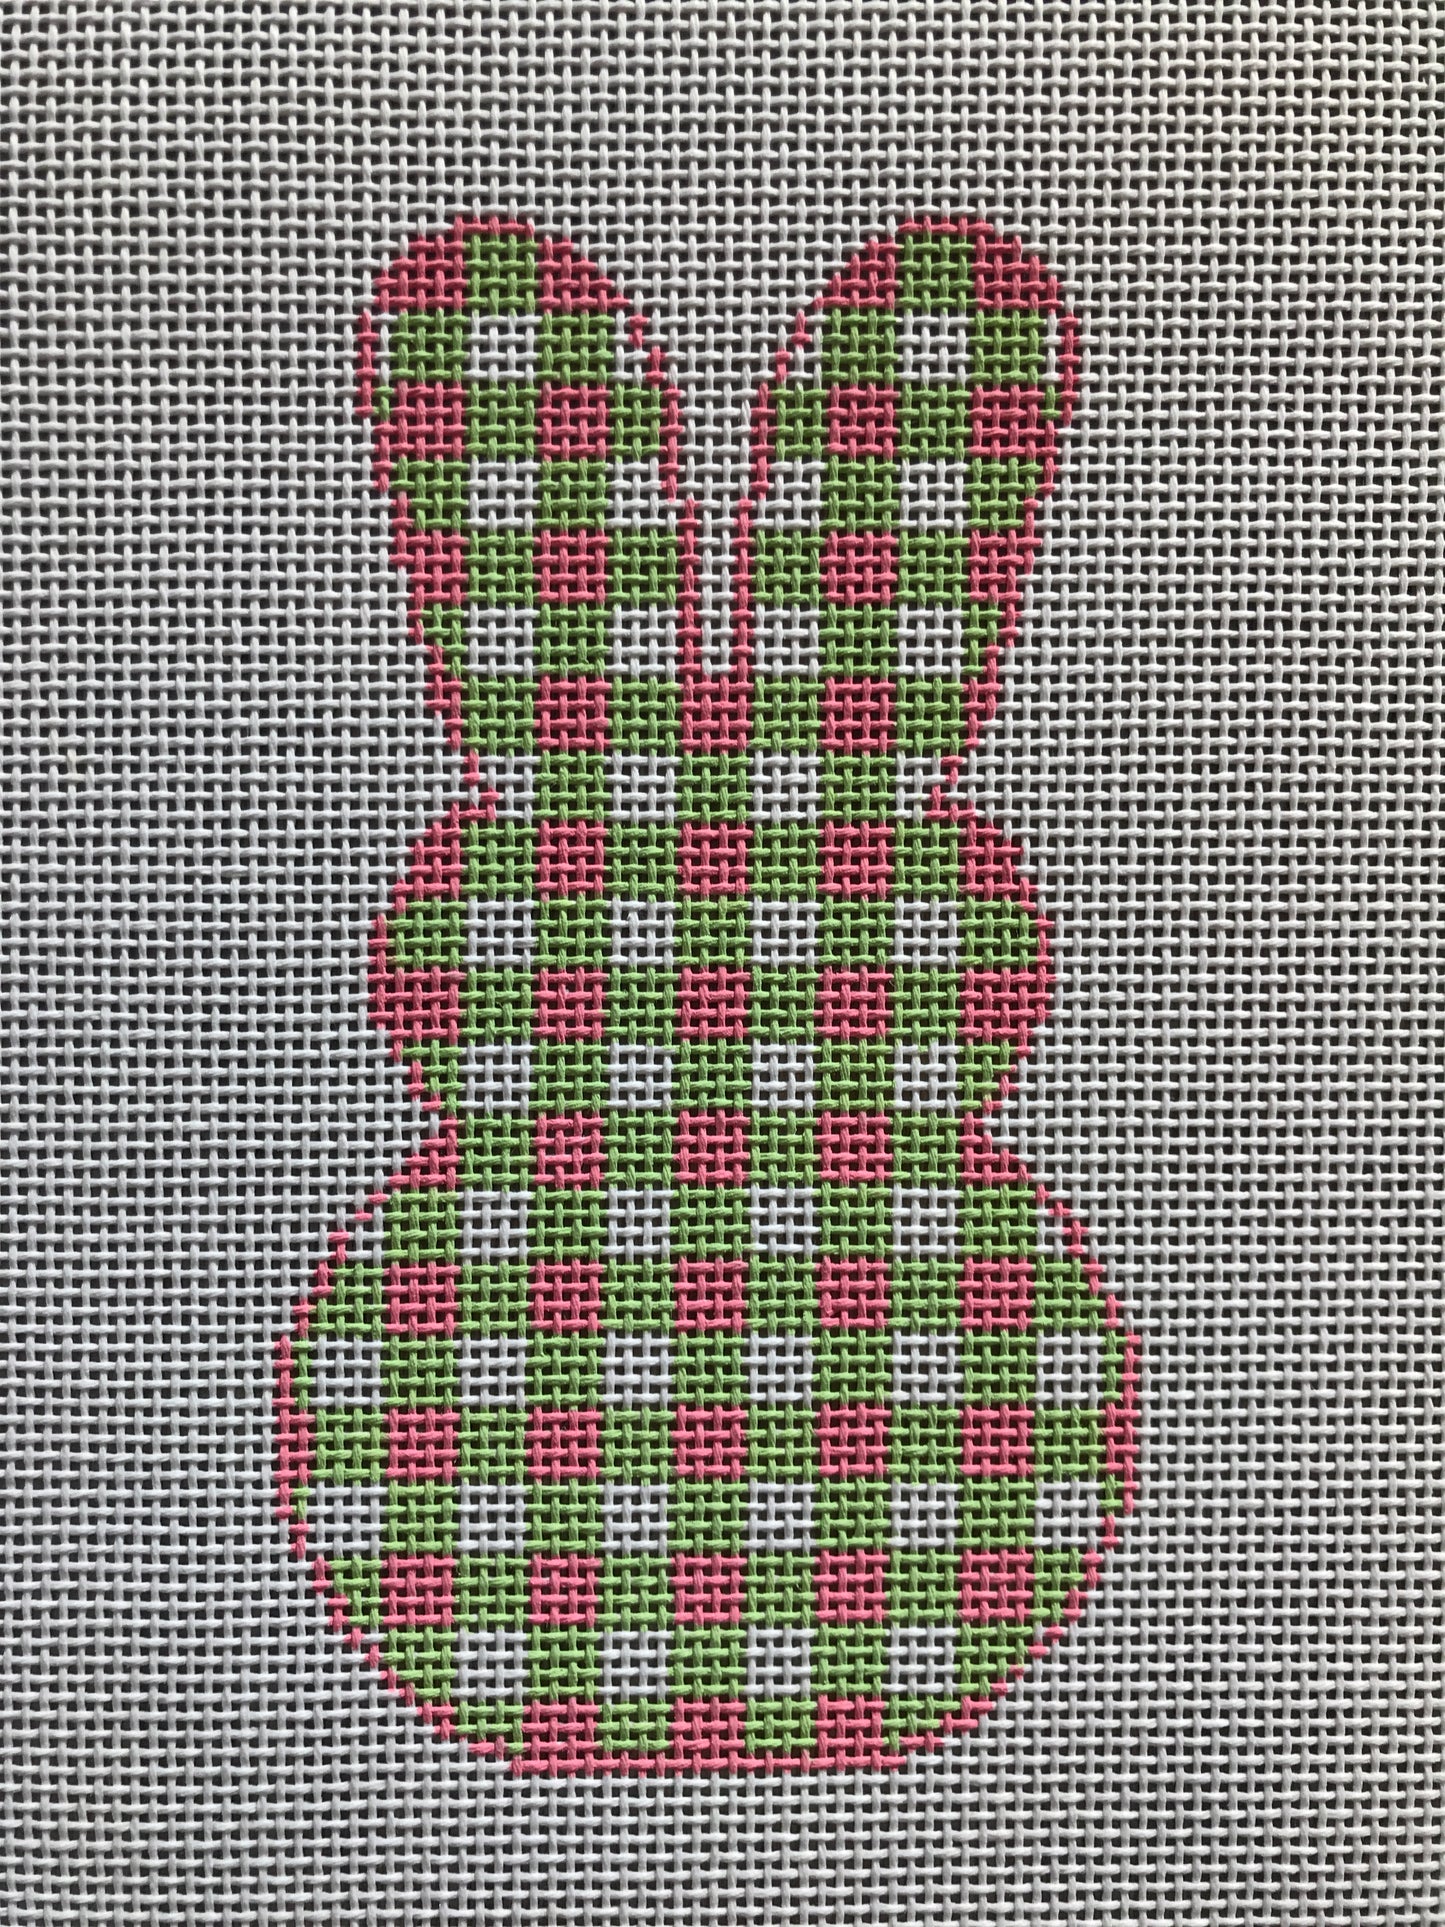 Gingham Bunny Pink and Green